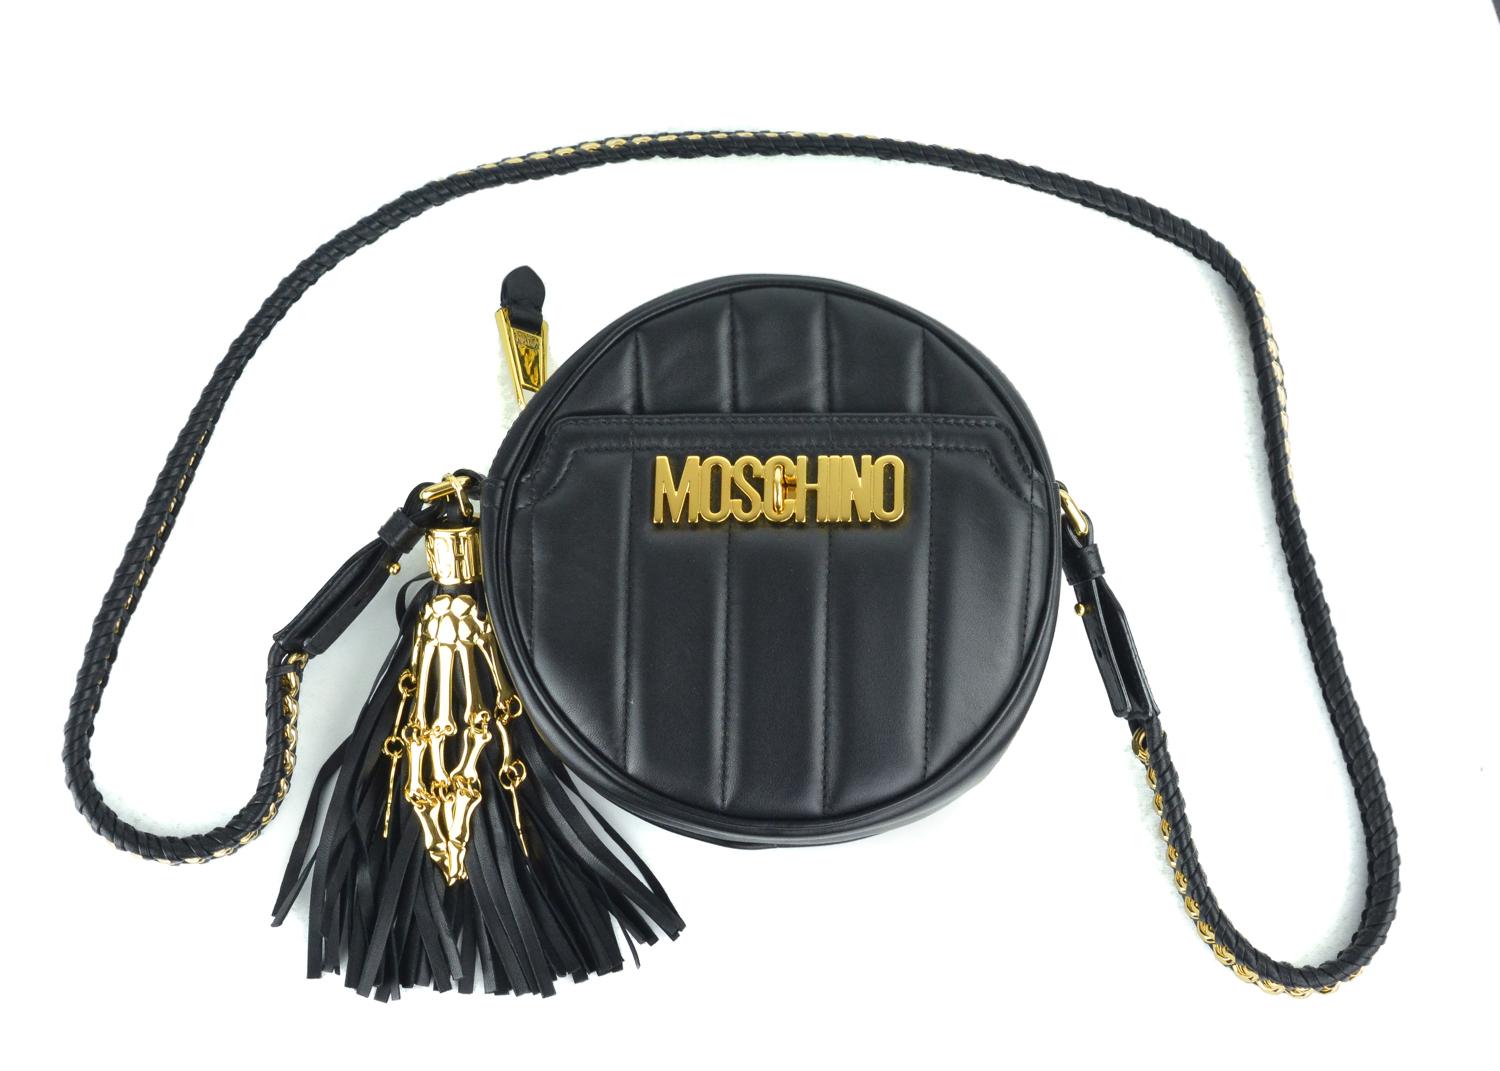 Moschino's black leather quilted round shoulder bag. This bag features a gold tone hardware moschino logo with vertical quilted detailing. The bag also features a fringe onthe side with a gold tone skeletal hand to accompany it. Perfect everyday bag